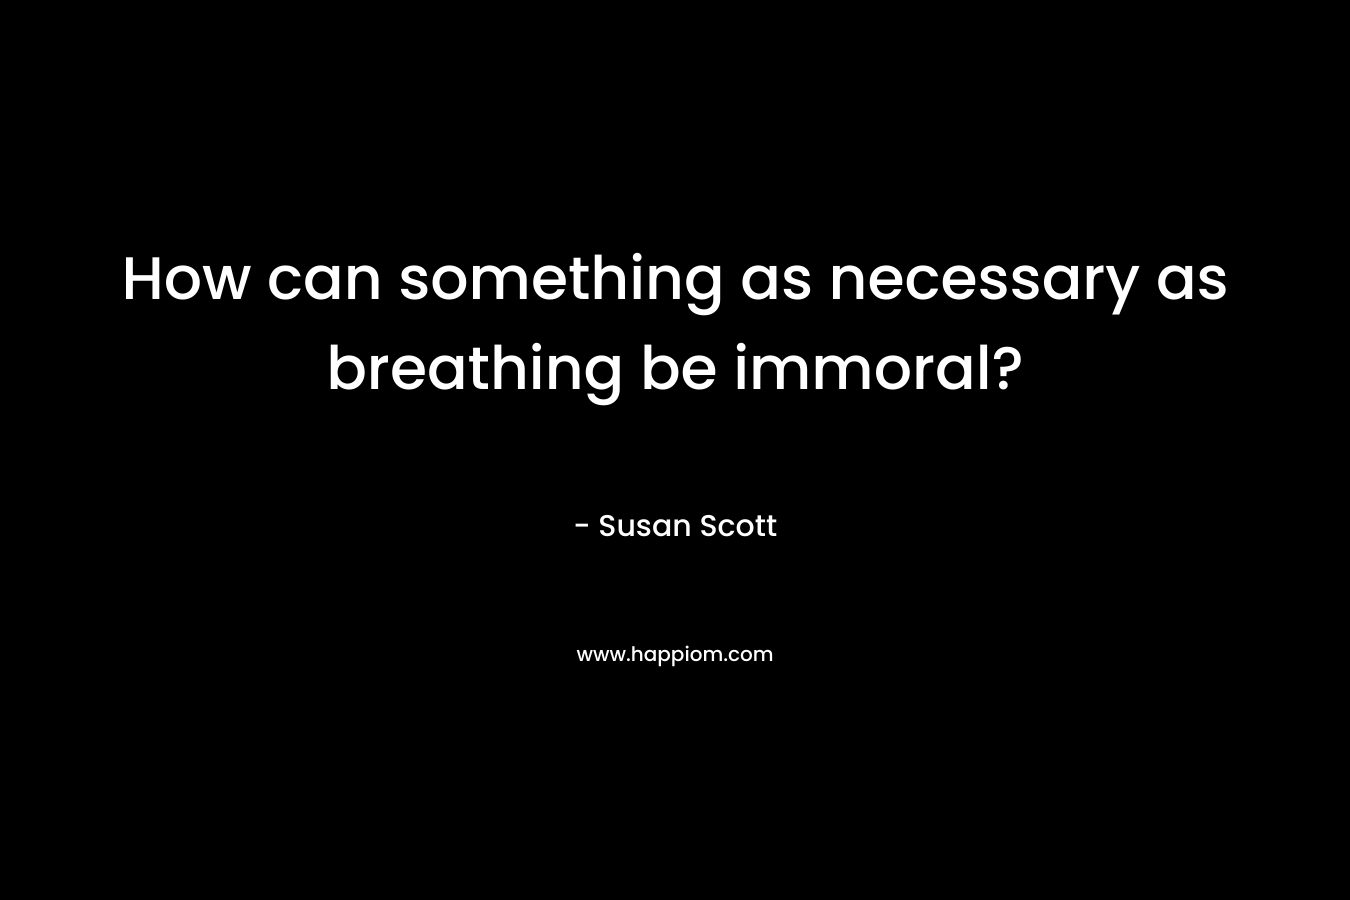 How can something as necessary as breathing be immoral?